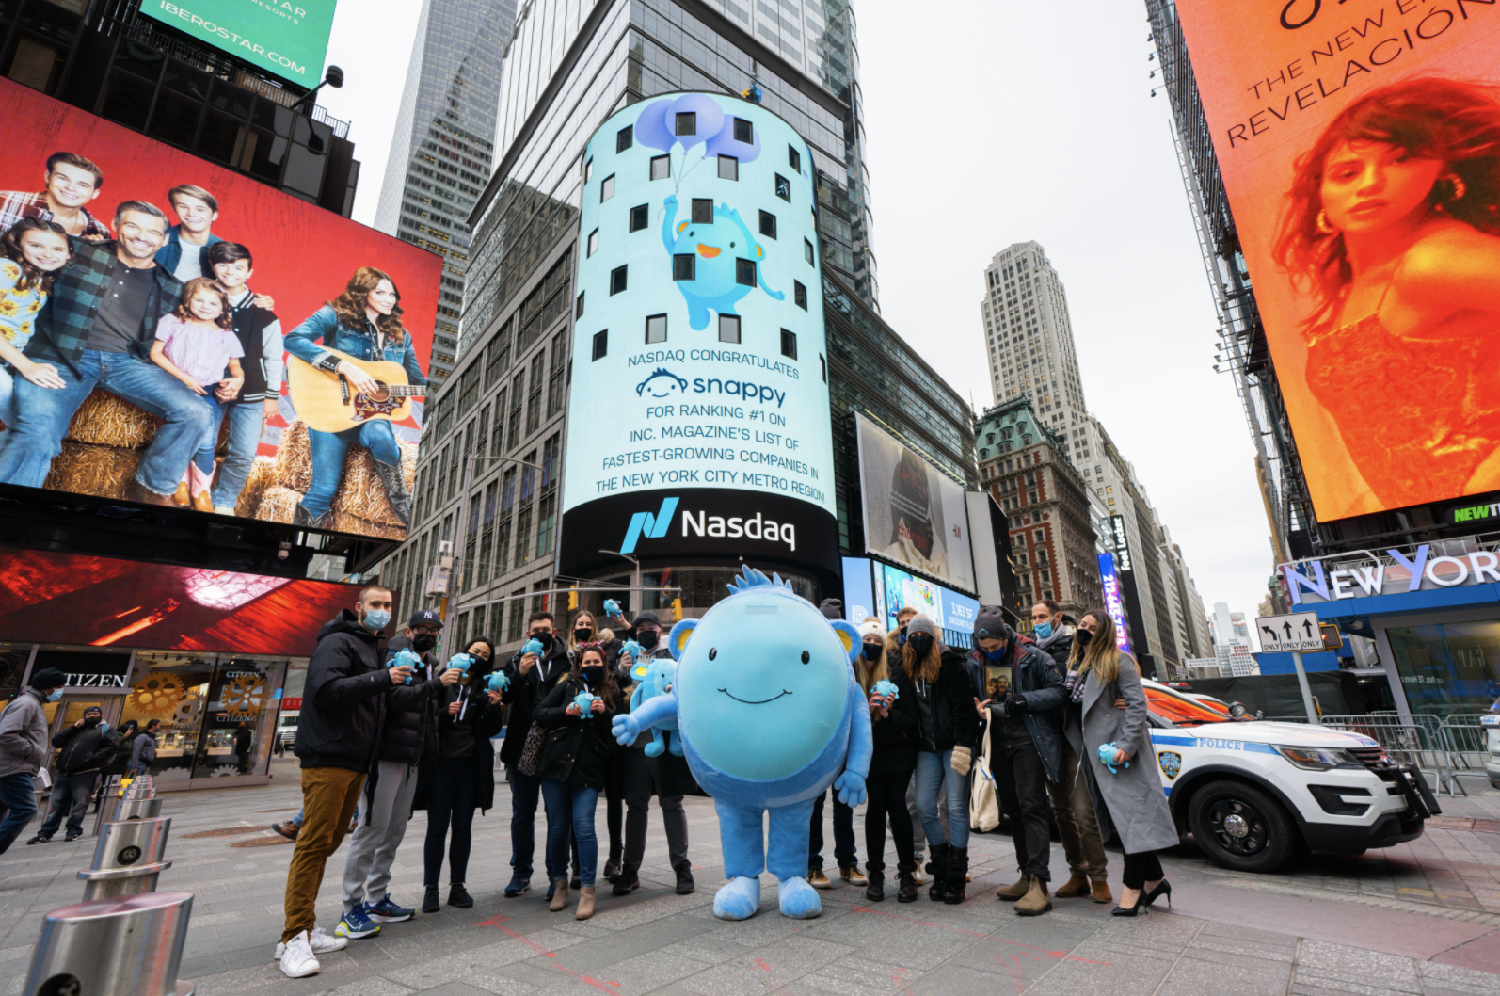 Snappy on the Nasdaq Tower in Times Square